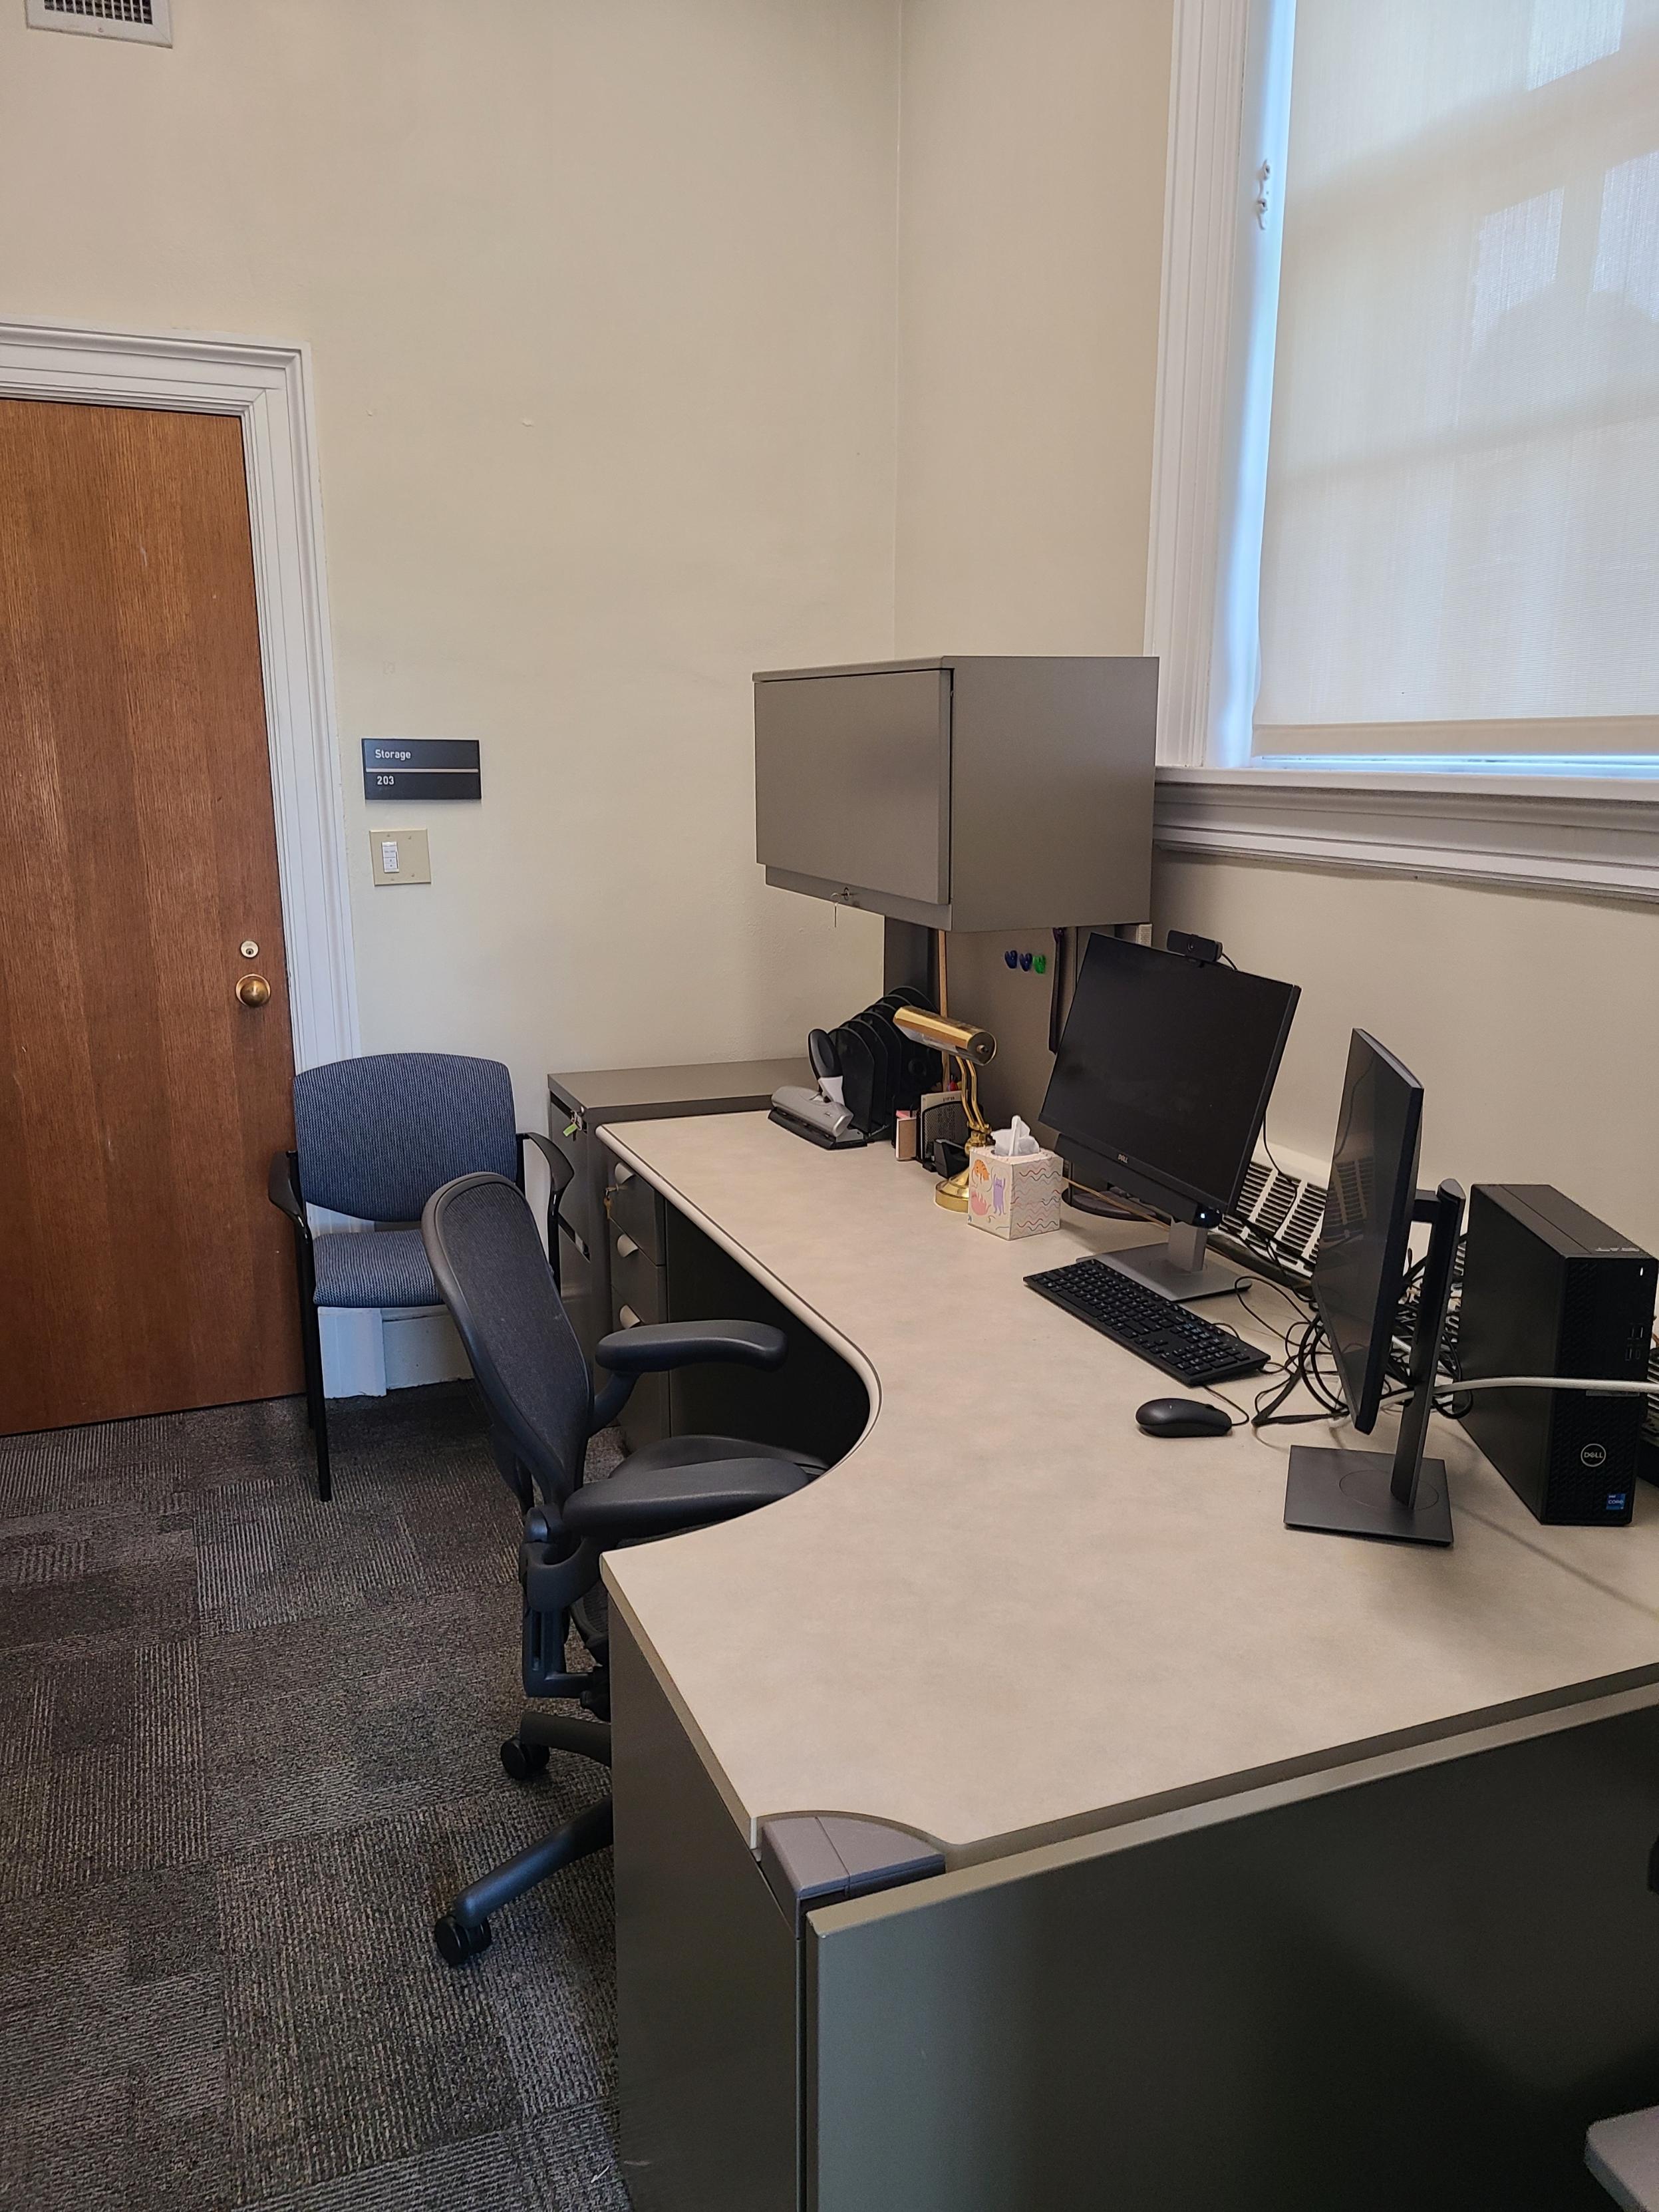 Office with a large corner desk facing a large window with the shade drawn, a PC workstation with two monitors, a small desk lamp and overhead enclosed bookshelf, a comfortable chair and second side chair.